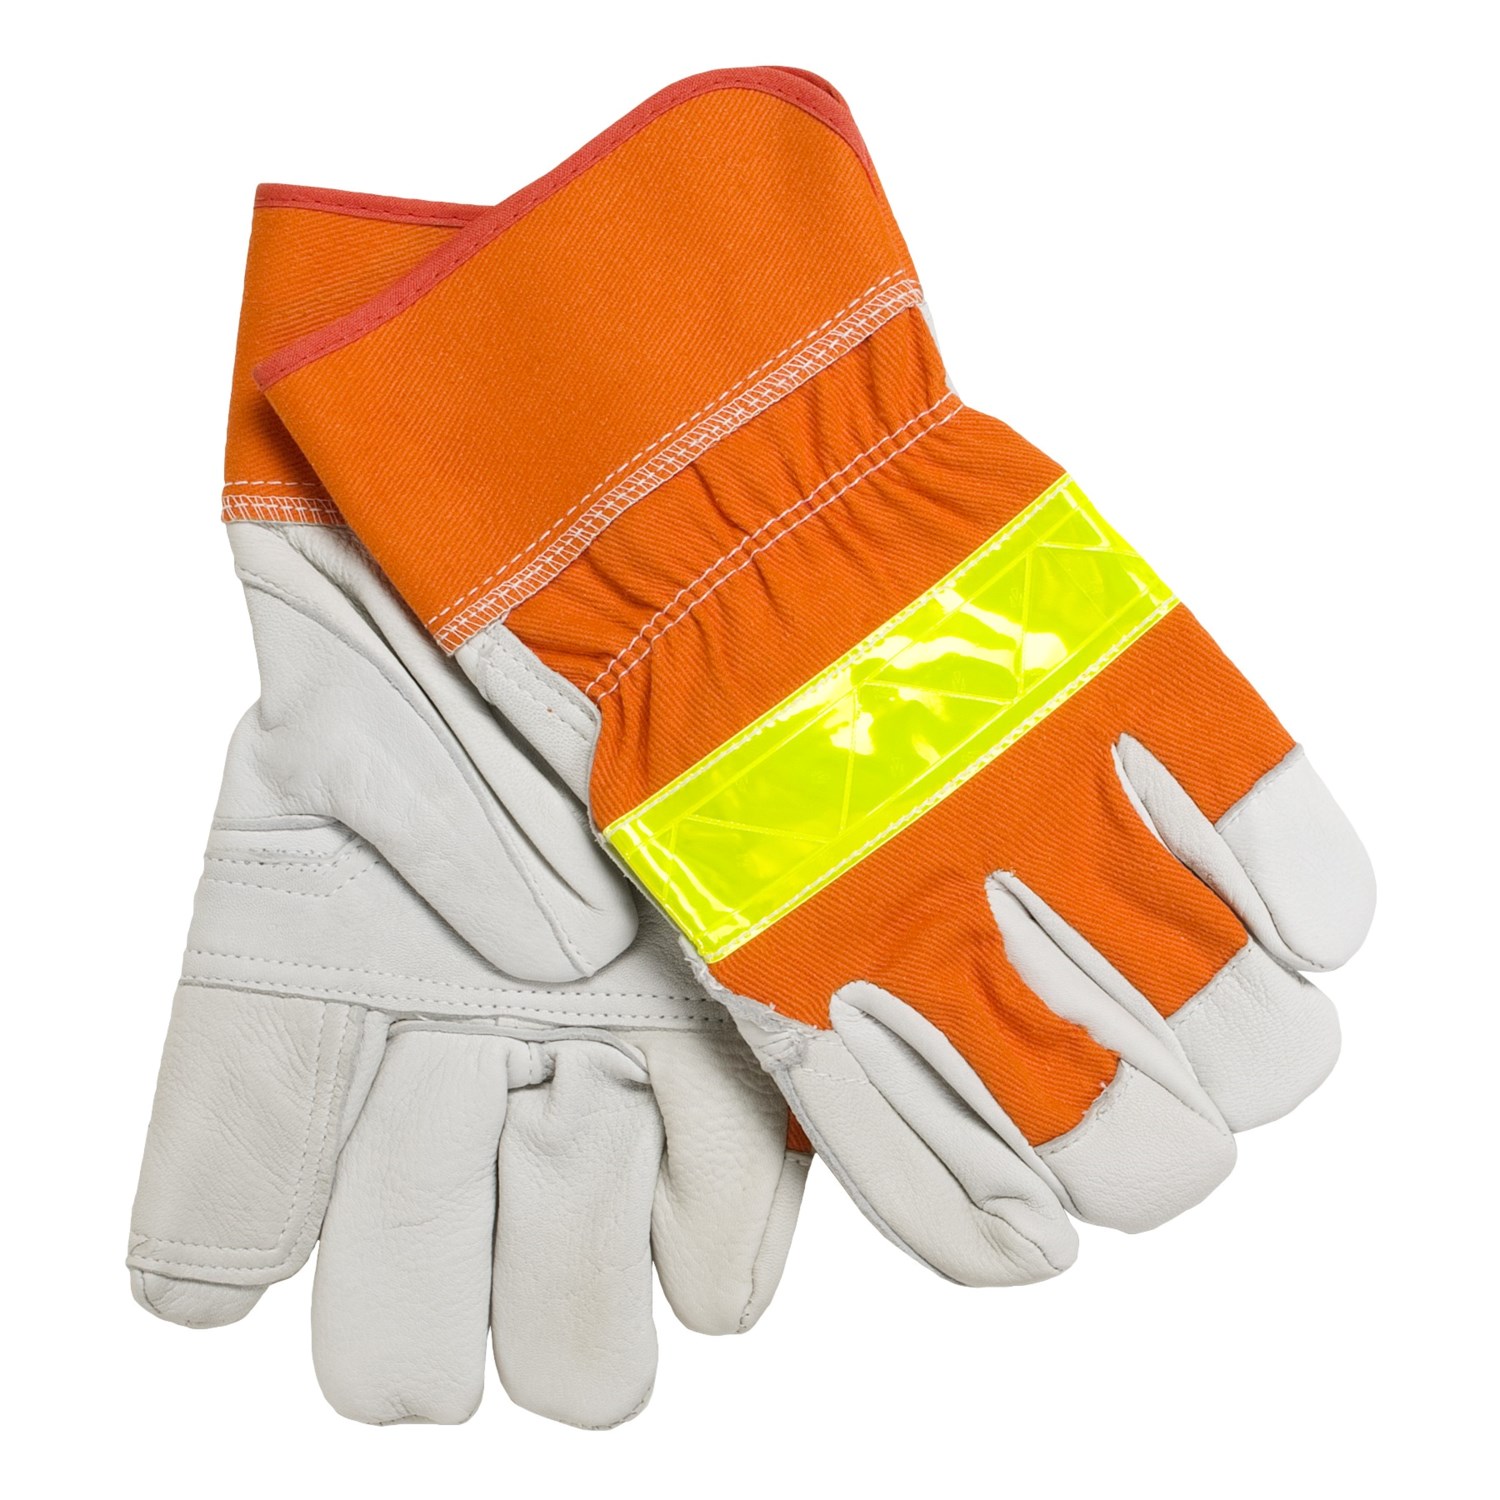 North American Trading Deerskin Gloves with Reflective Strip (For Men and Women) 3908H 60